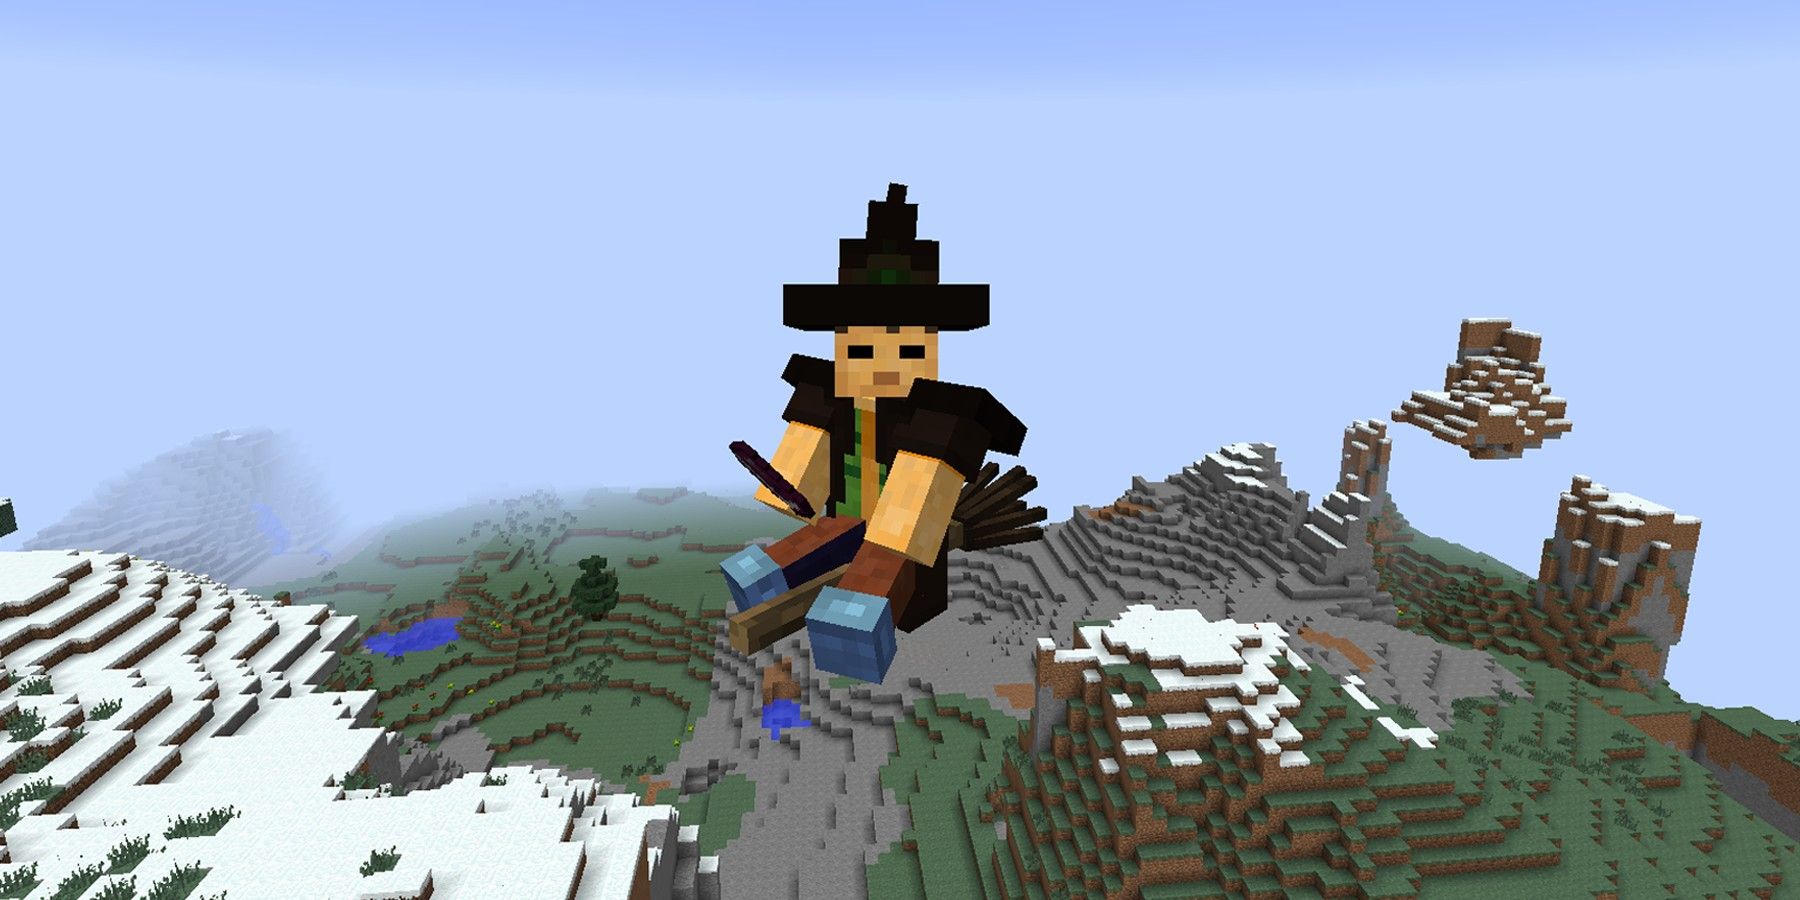 Minecraft wizard character flying on a broom